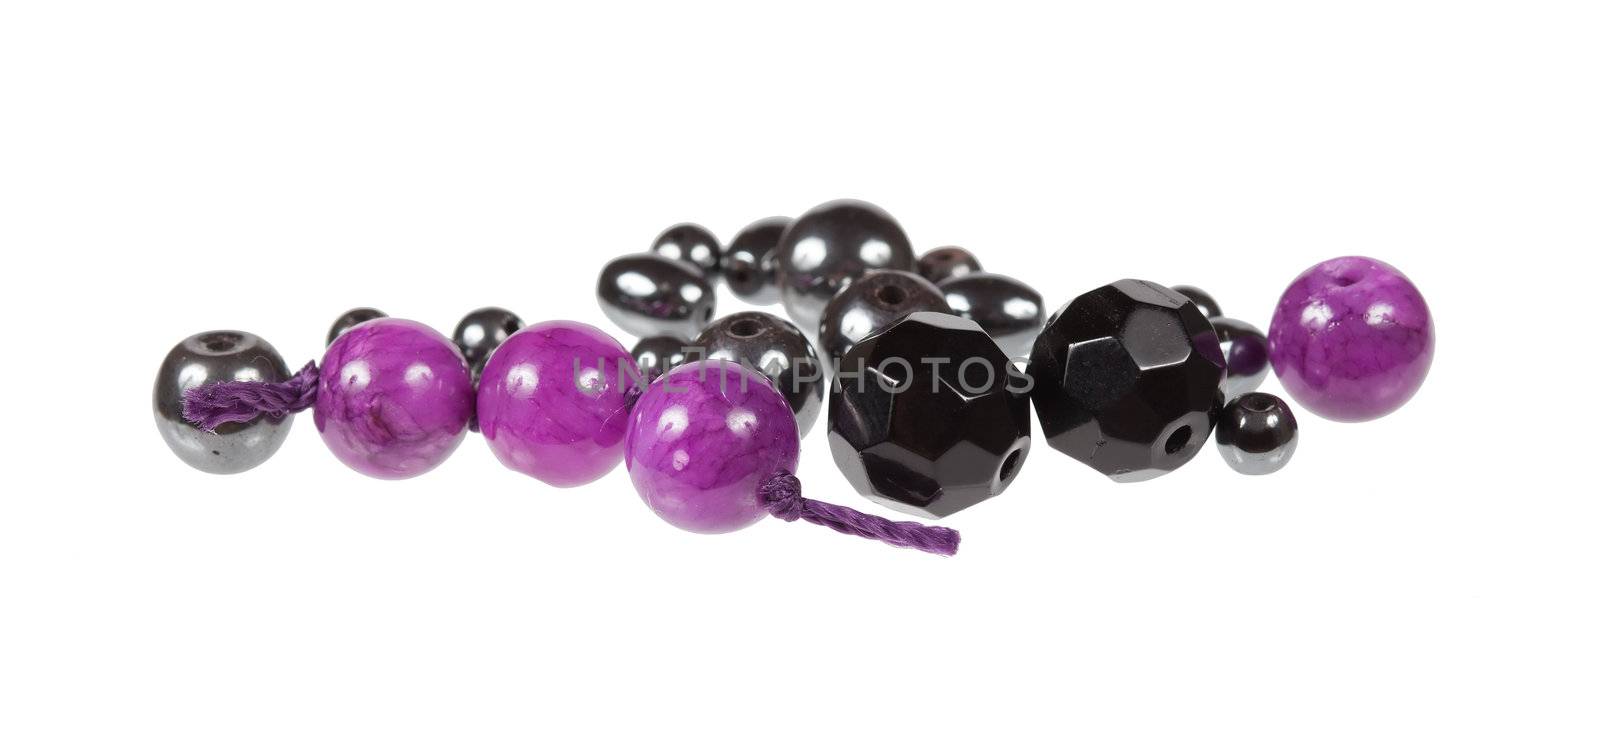 Set of beads for making jewelry. Isolated on white background